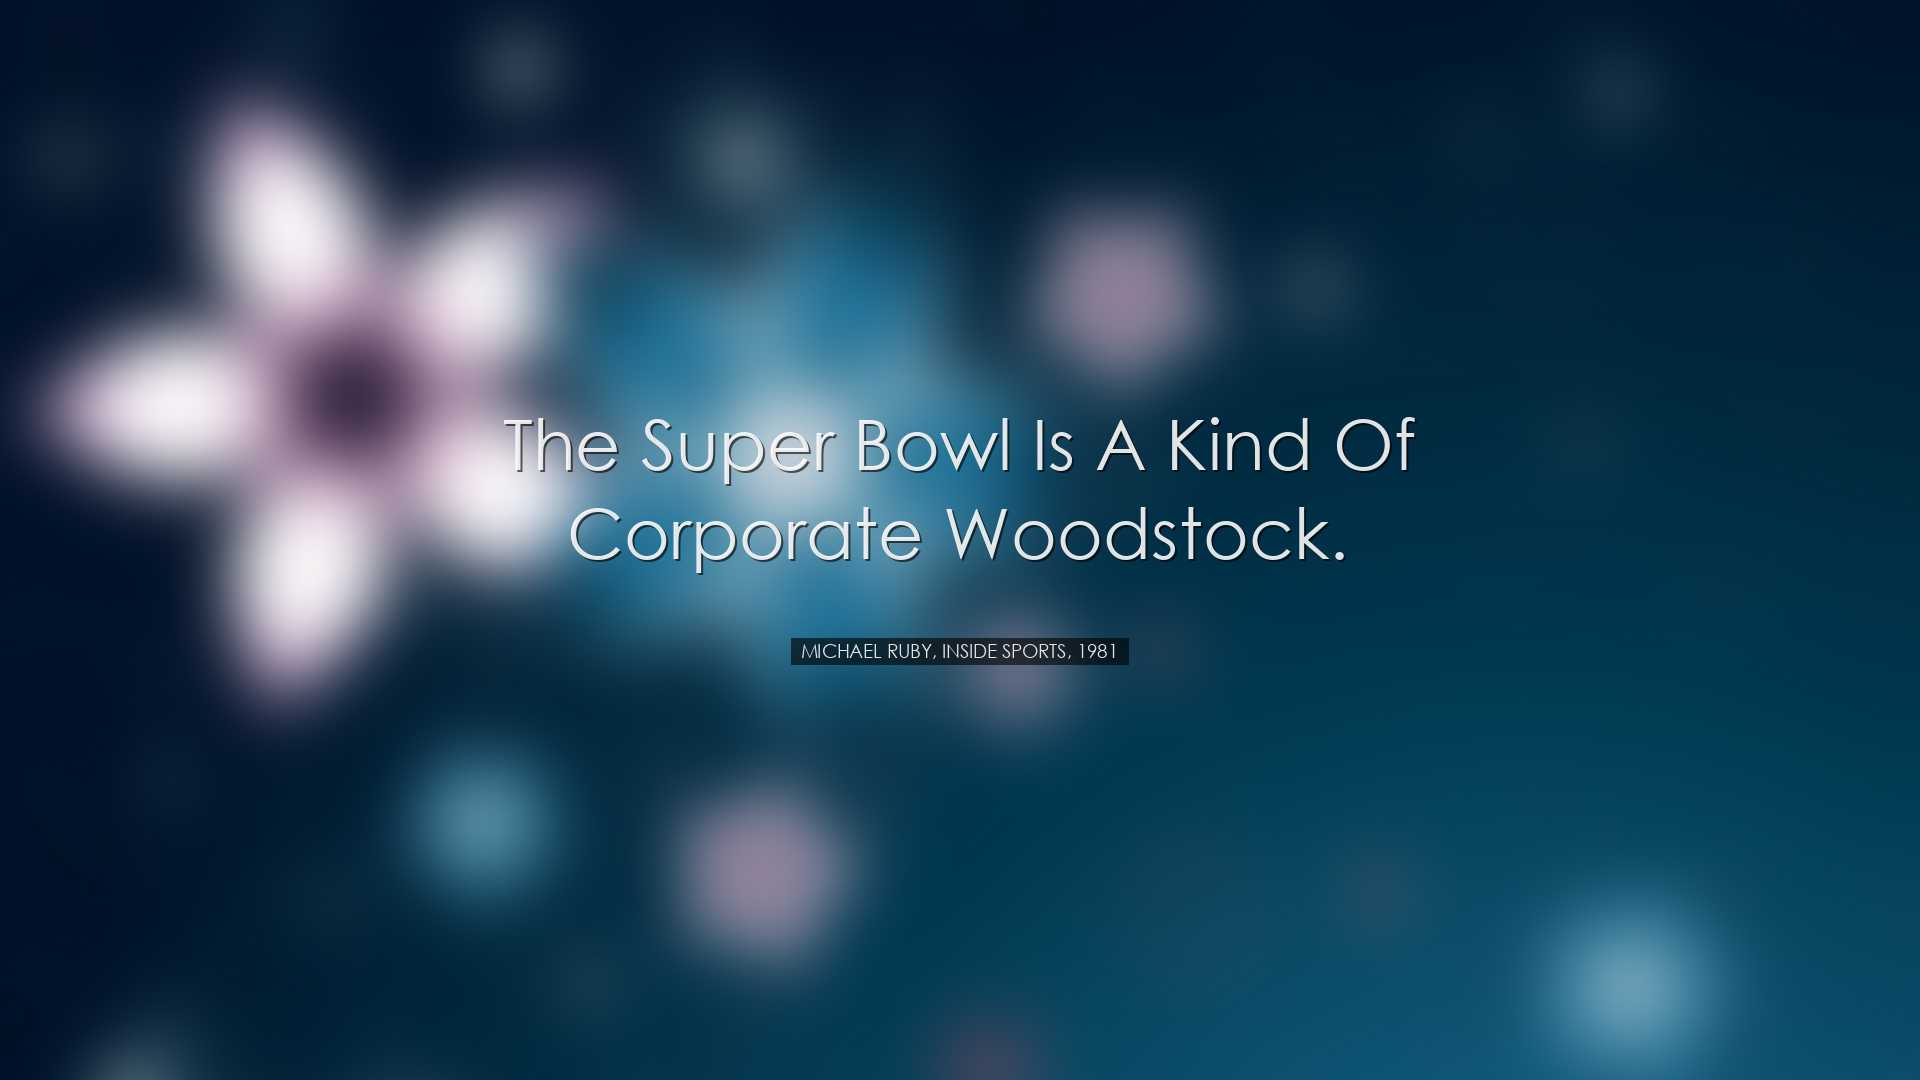 The Super Bowl is a kind of corporate Woodstock. - Michael Ruby, I